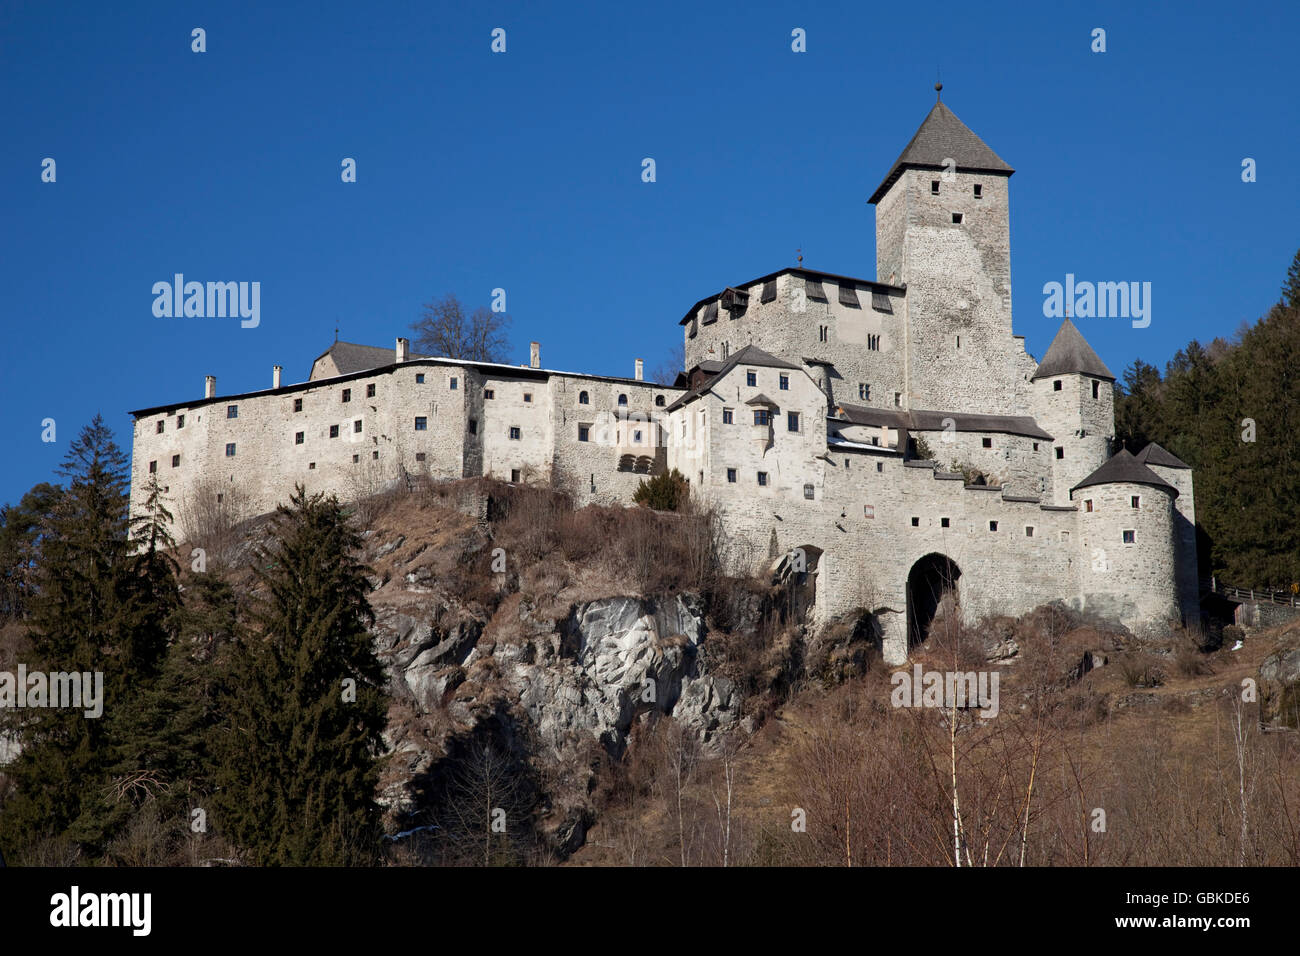 Castle Tures, Sand in Taufers, Campo Tures, Tauferer Tal valley, Valli di Tures, Alto Adige, Italy, Europe Stock Photo